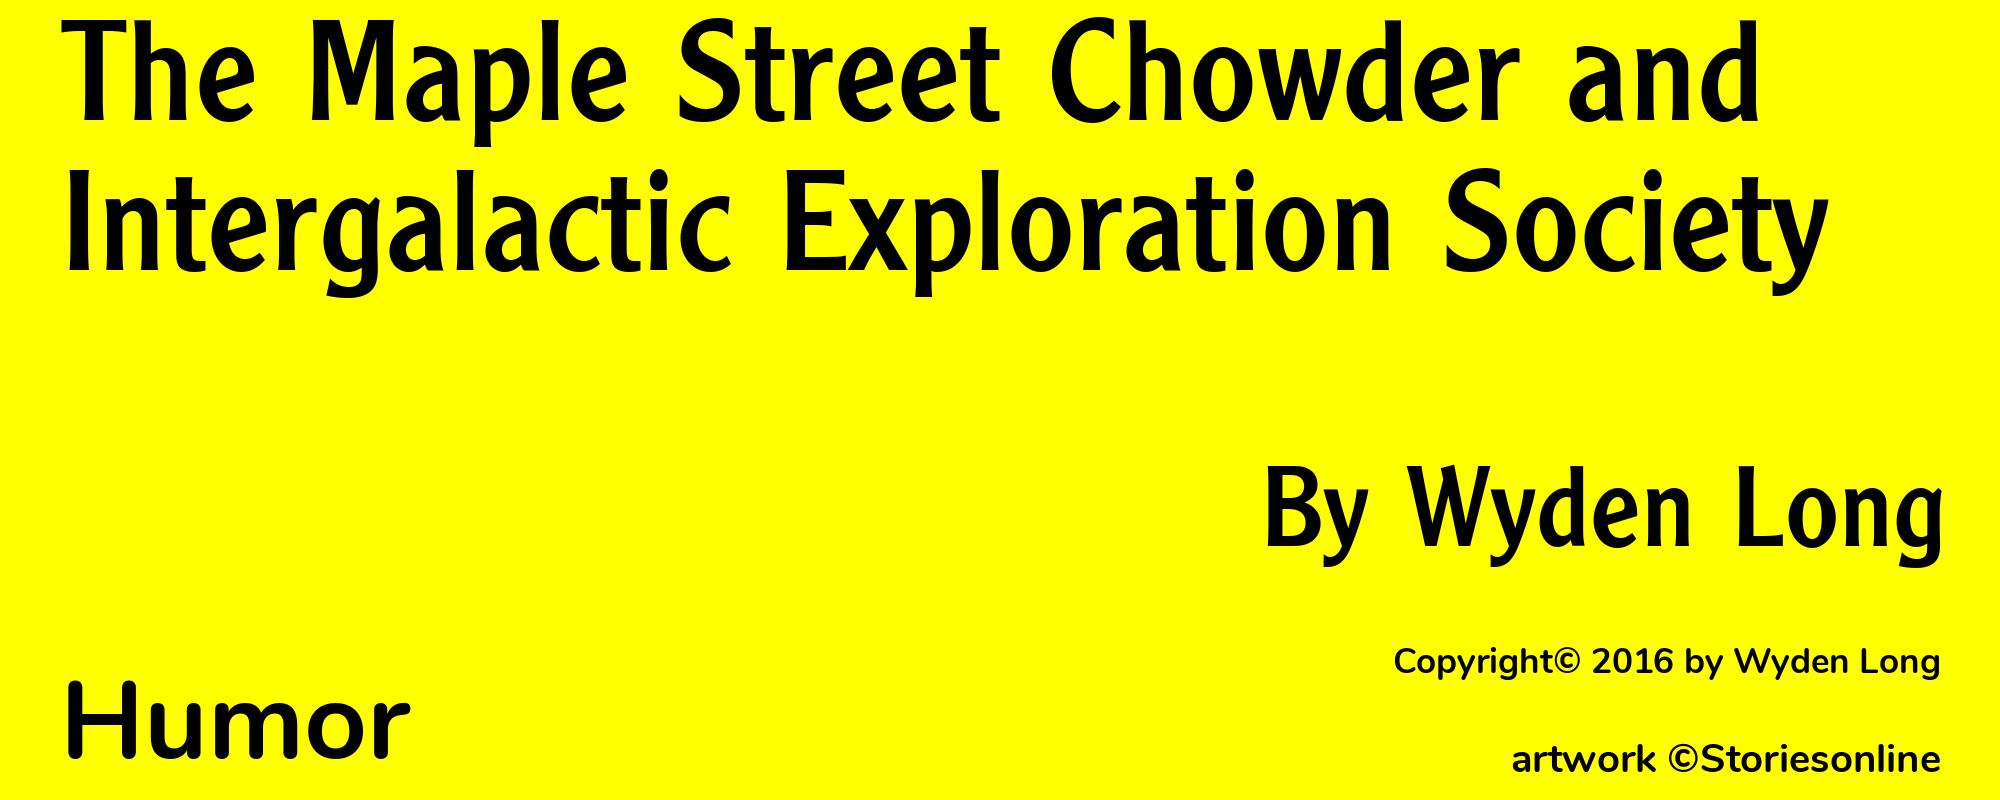 The Maple Street Chowder and Intergalactic Exploration Society - Cover